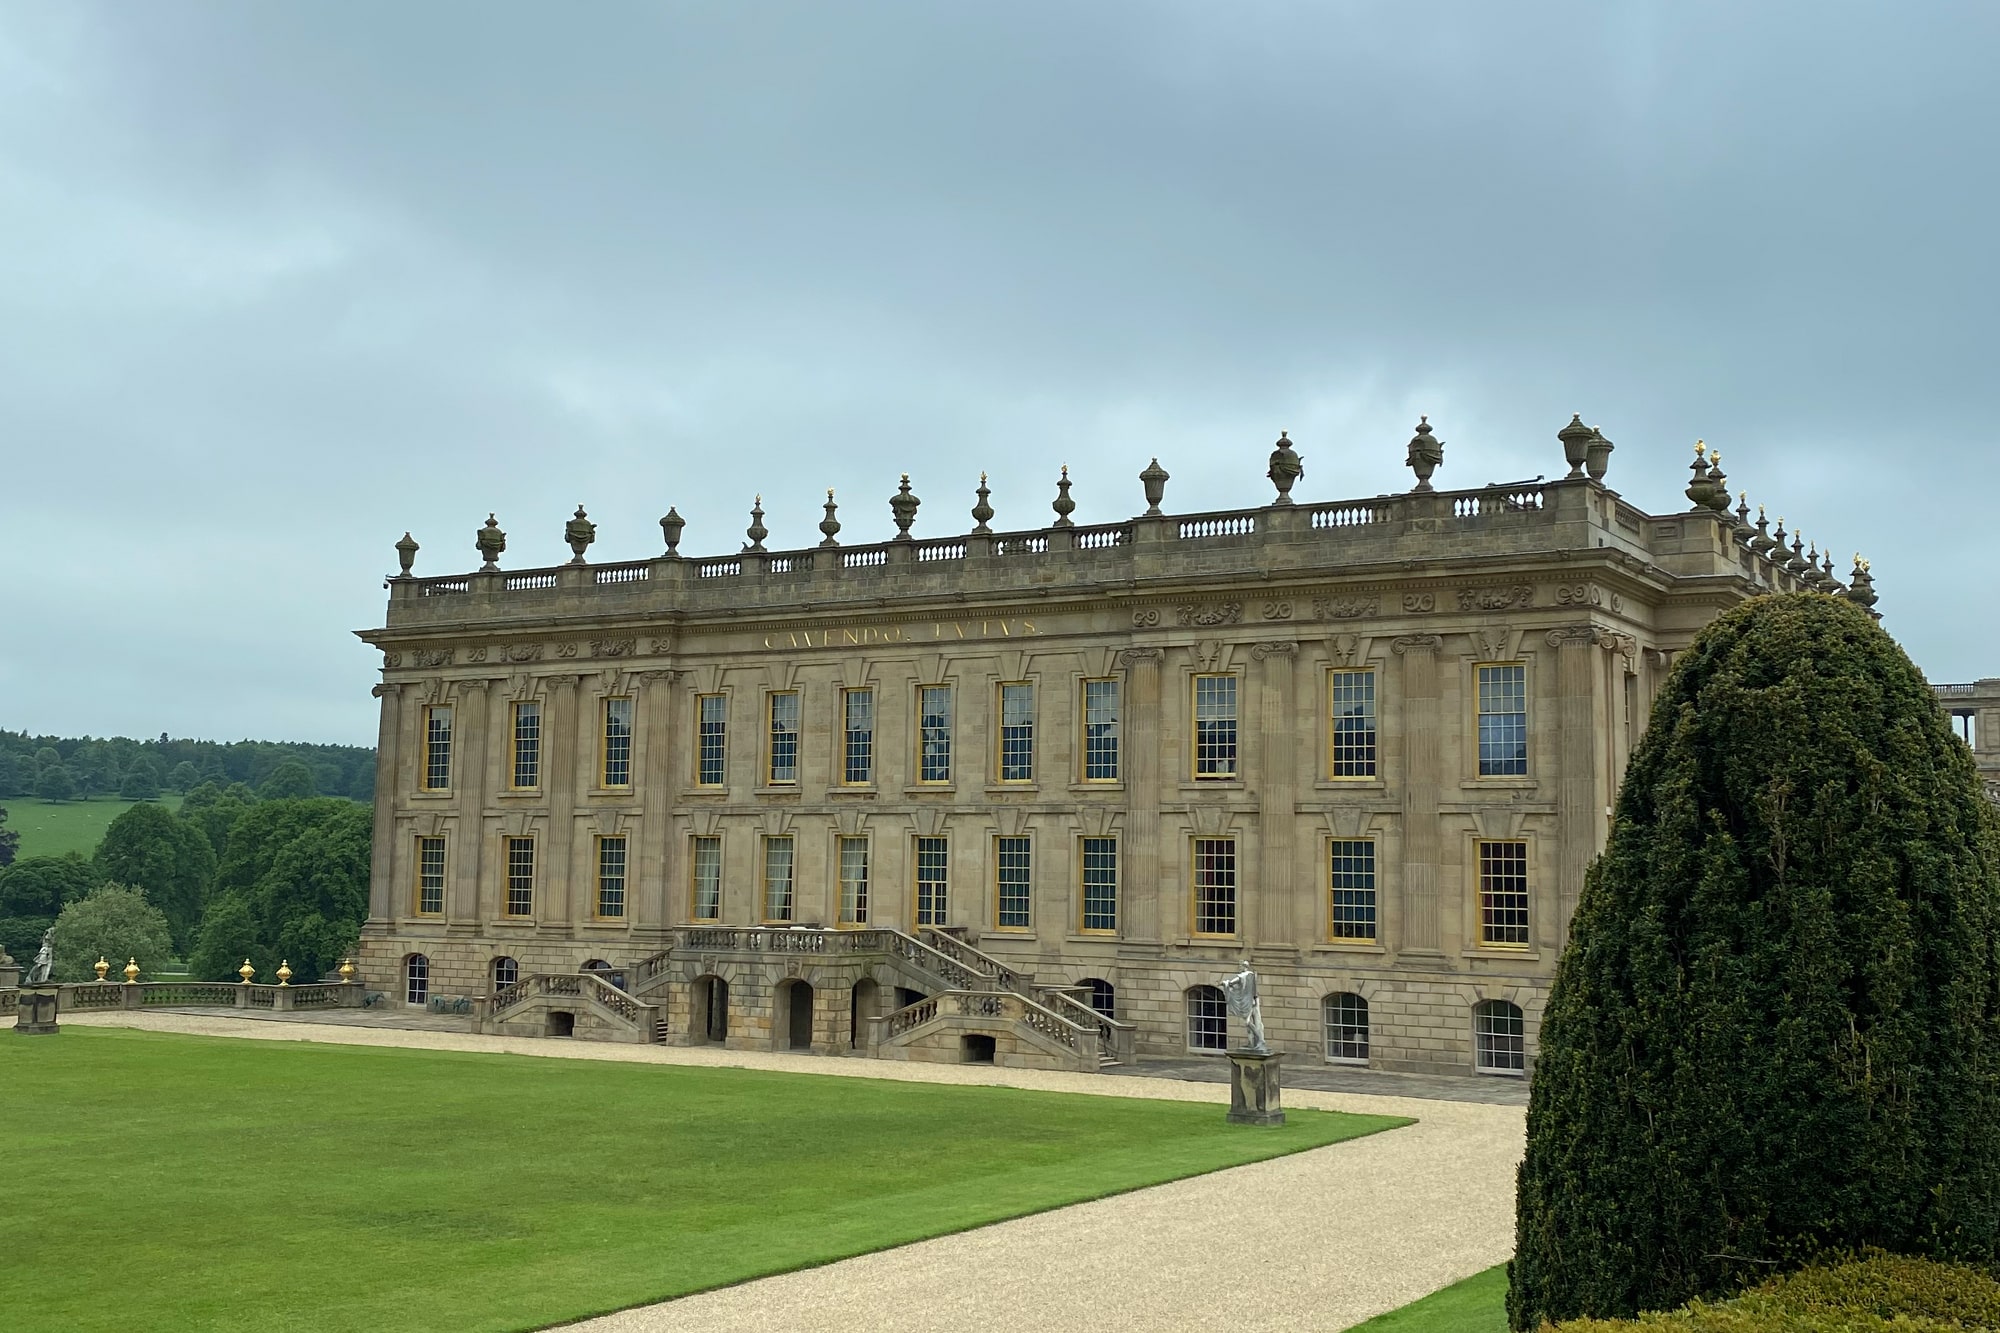 An image of the back of Chatsworth House